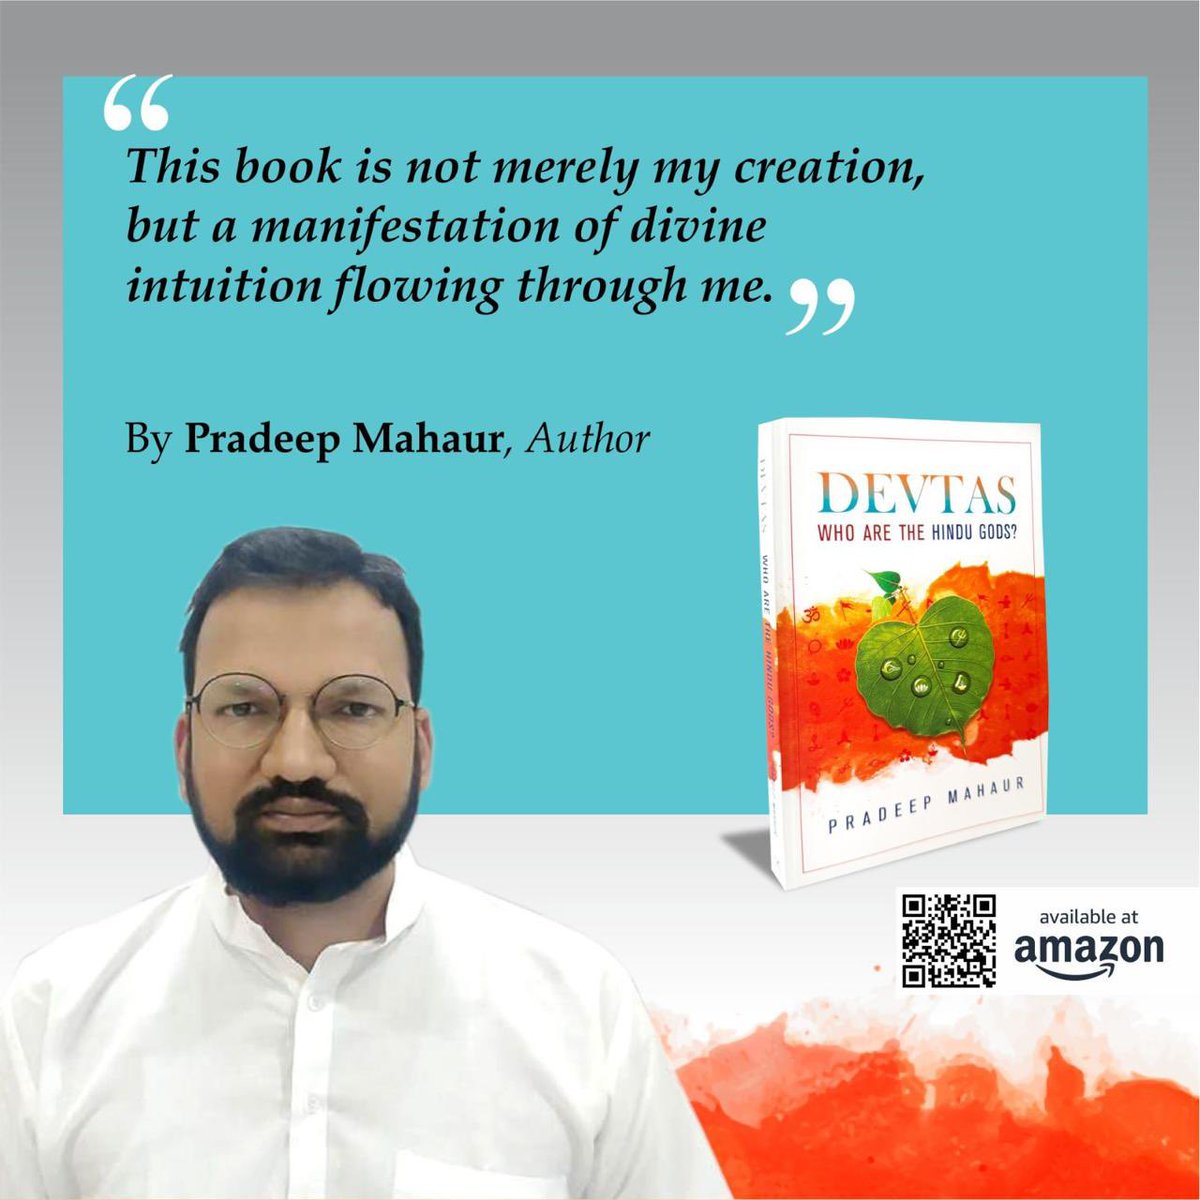 'Devtas-Who are Hindu Gods' by Pradeep Mahaur is a beacon of light in the search for spiritual truth. Join the journey of enlightenment today! #BookLaunchDevtas